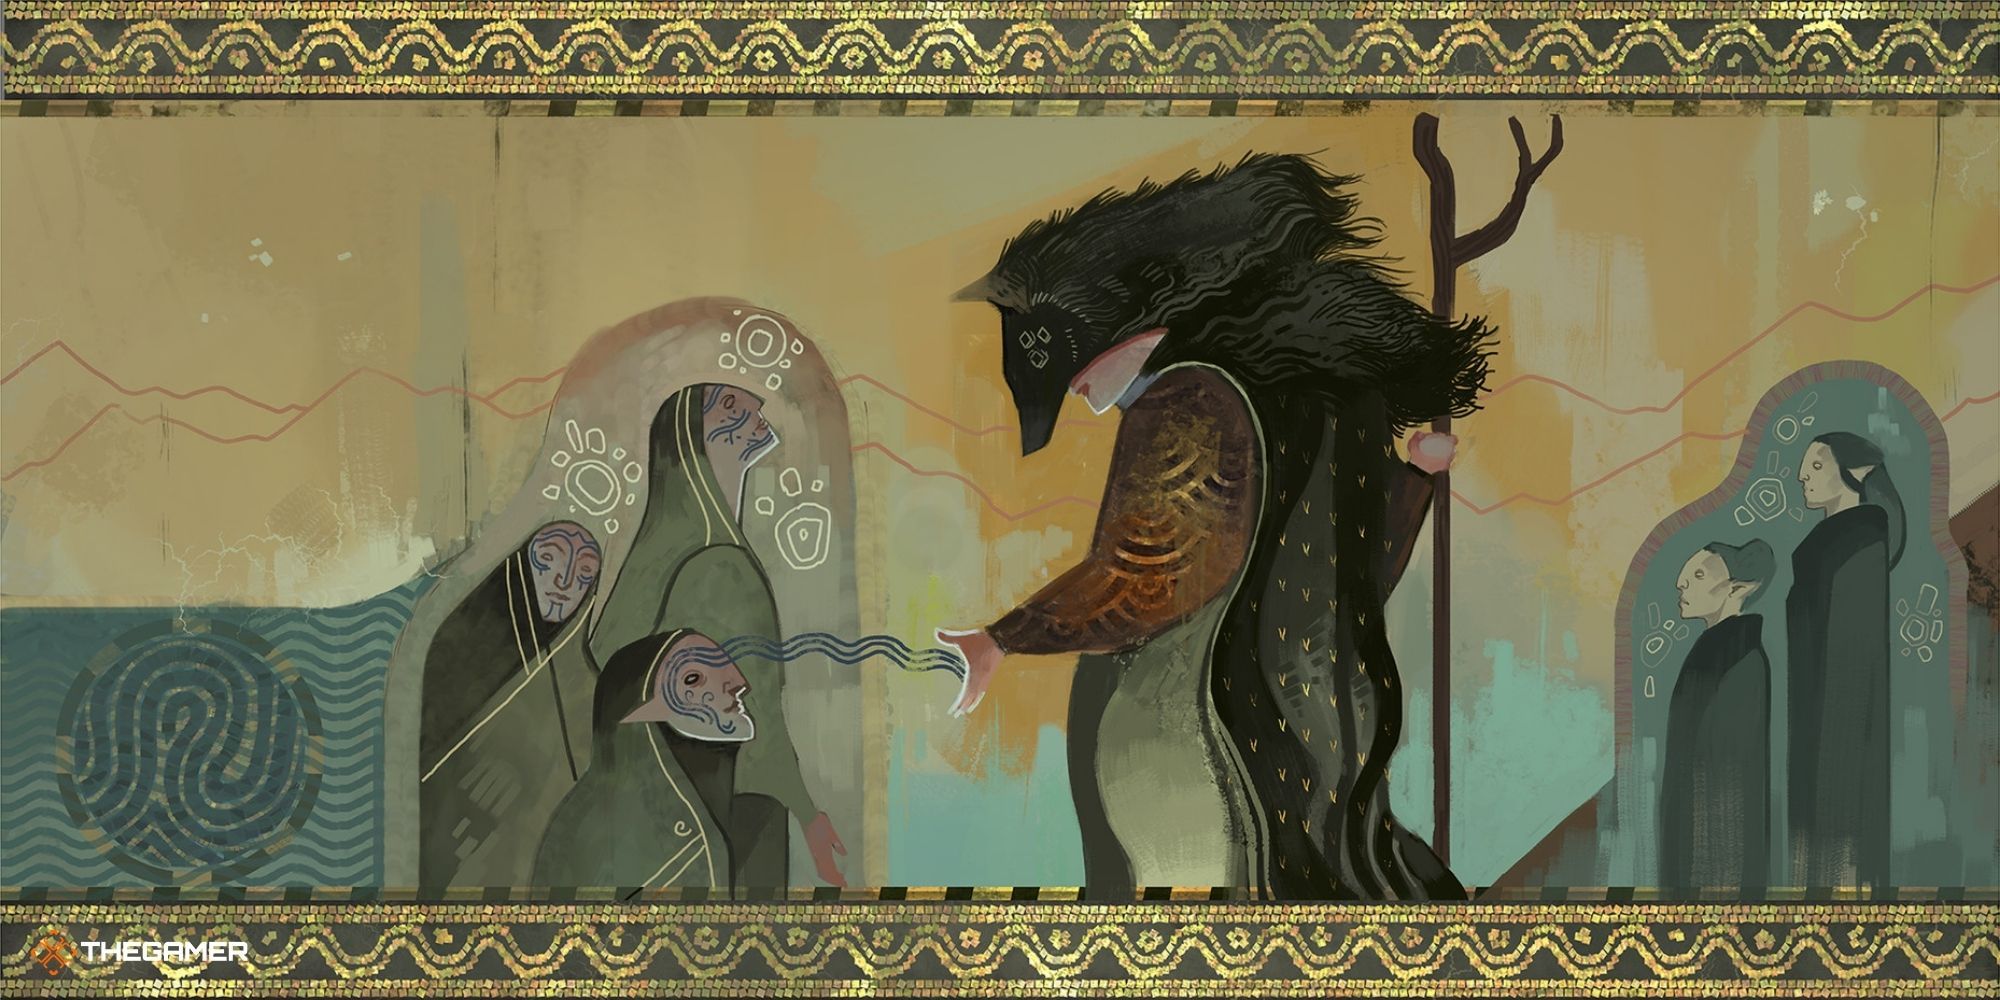 Dragon Age Inquisition Trespasser - Mural depicting Solas removing the vallaslin of slaves